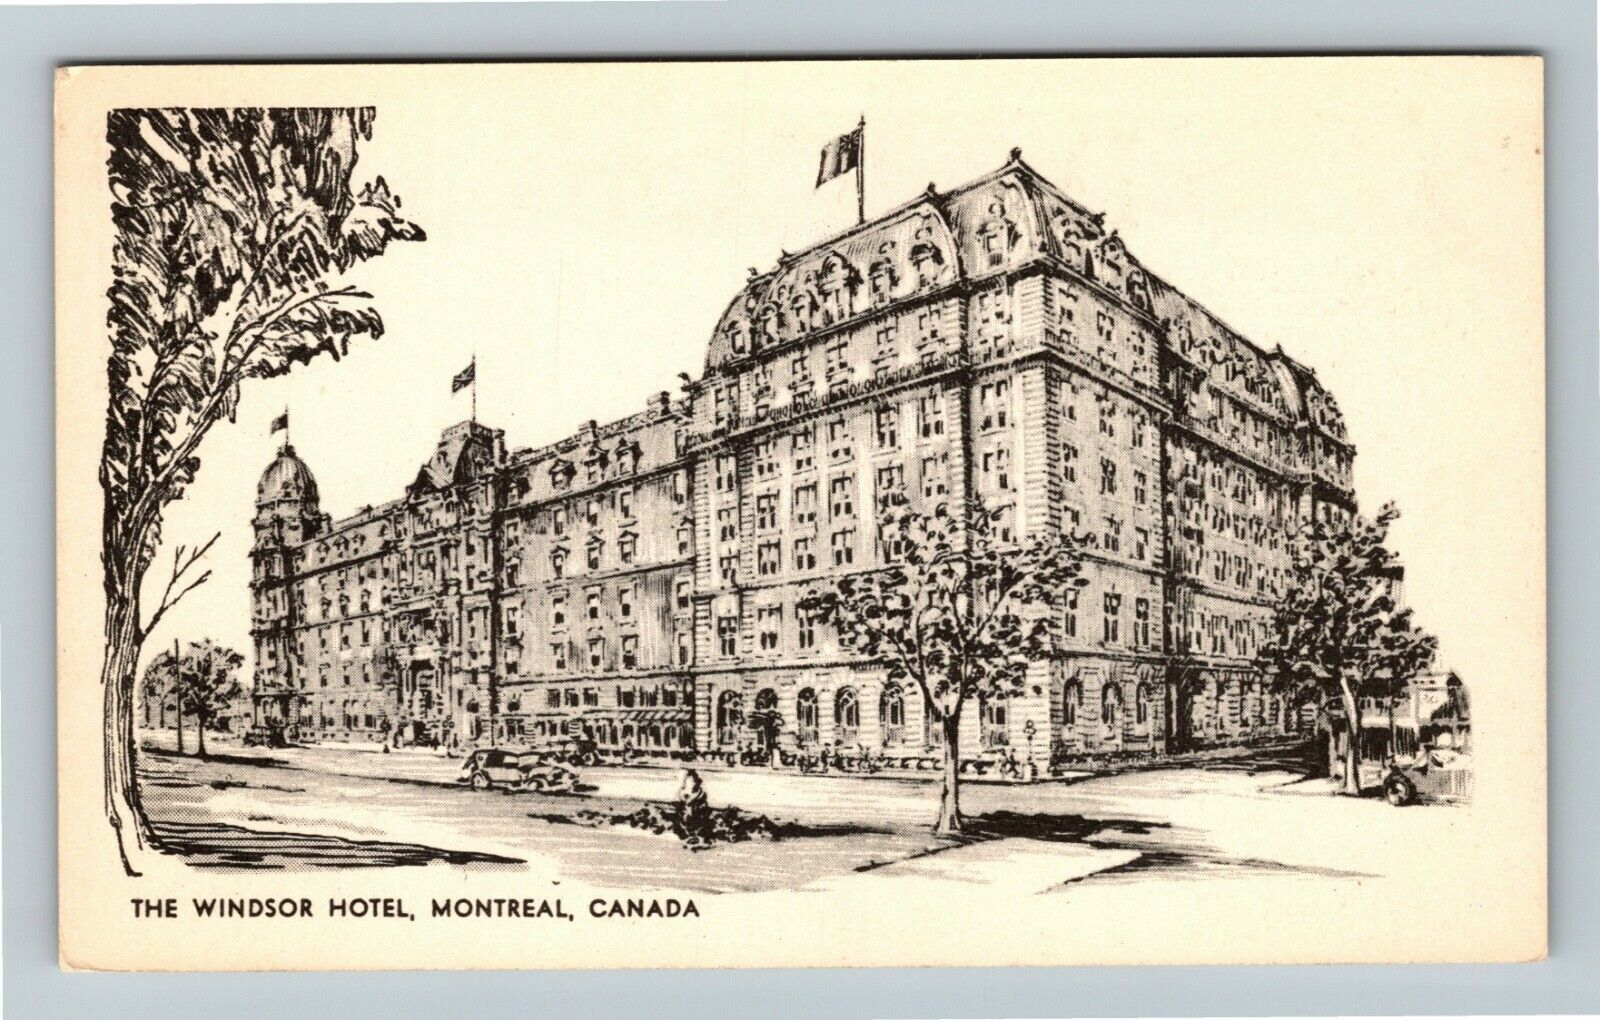 Montreal-Canada, The Windsor Hotel, Advertising, Vintage Postcard